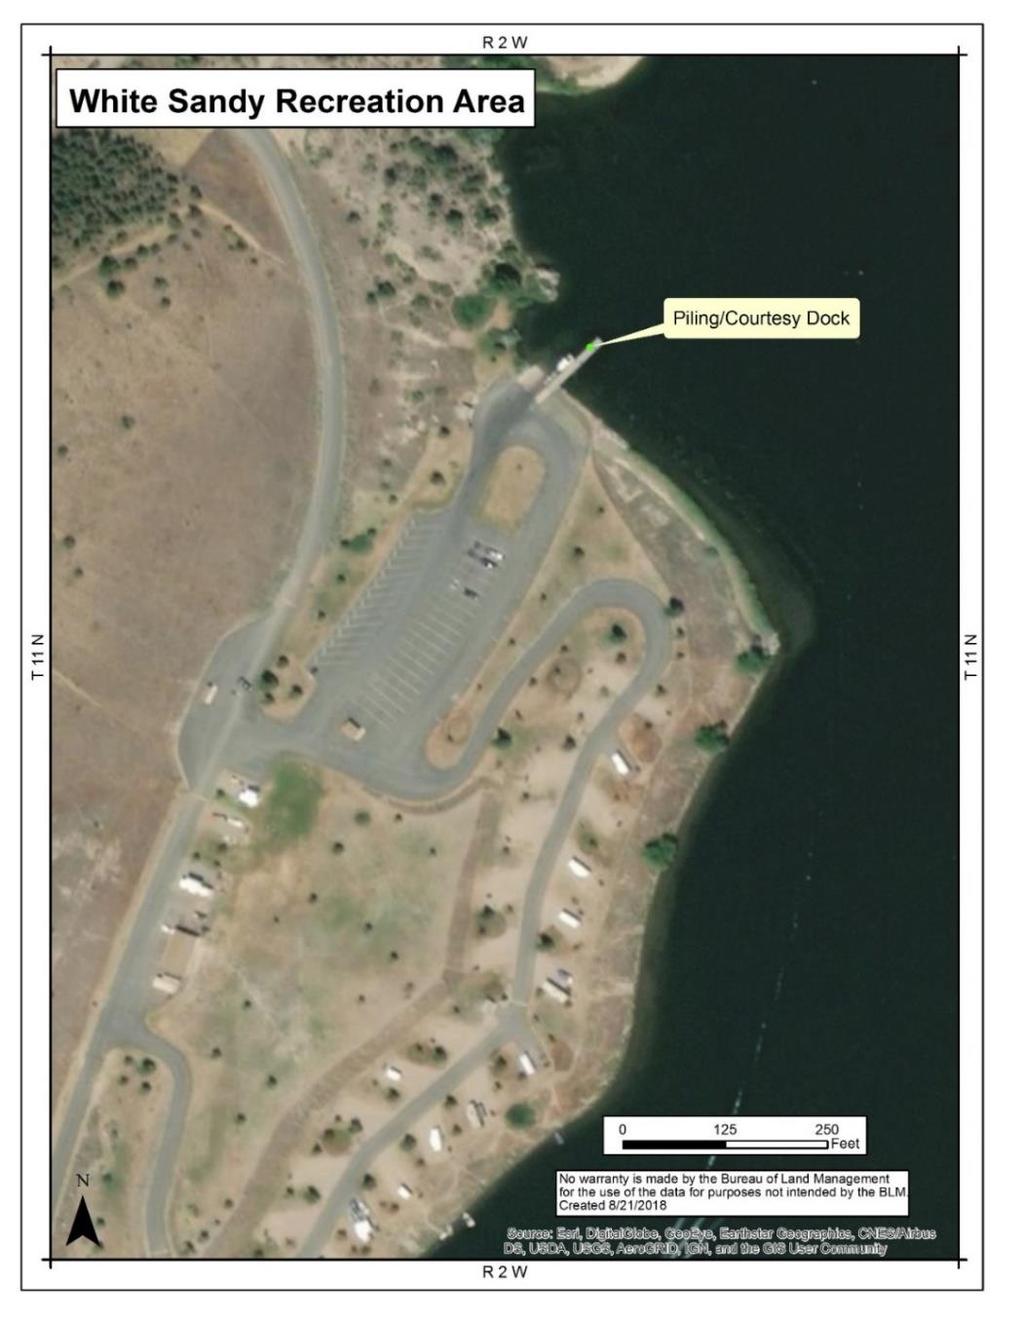 This project specifically supports public water access at a Project 2188 site. Fixing the courtesy docks would allow the continual use of the dock system so the public can access Hauser Reservoir.